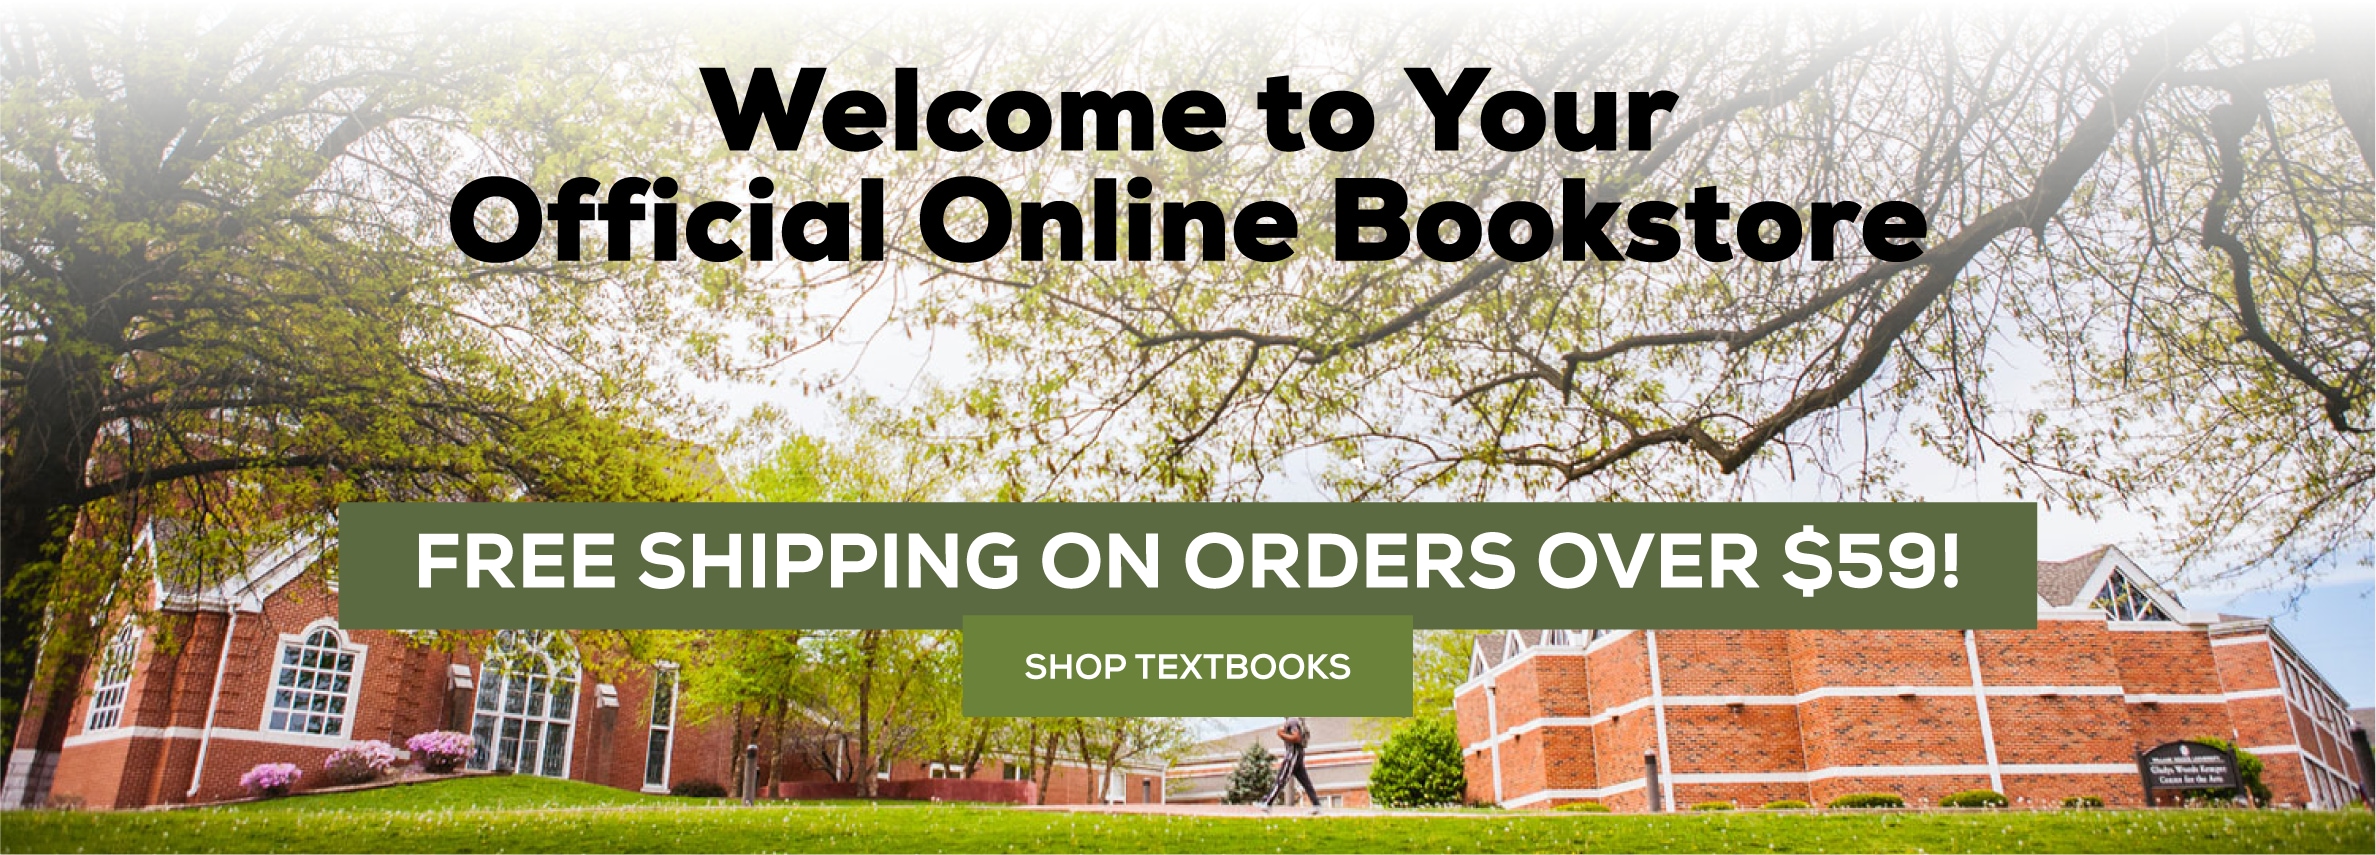 Welcome to your official online bookstore. Free shipping on orders over $59! Shop textbooks.